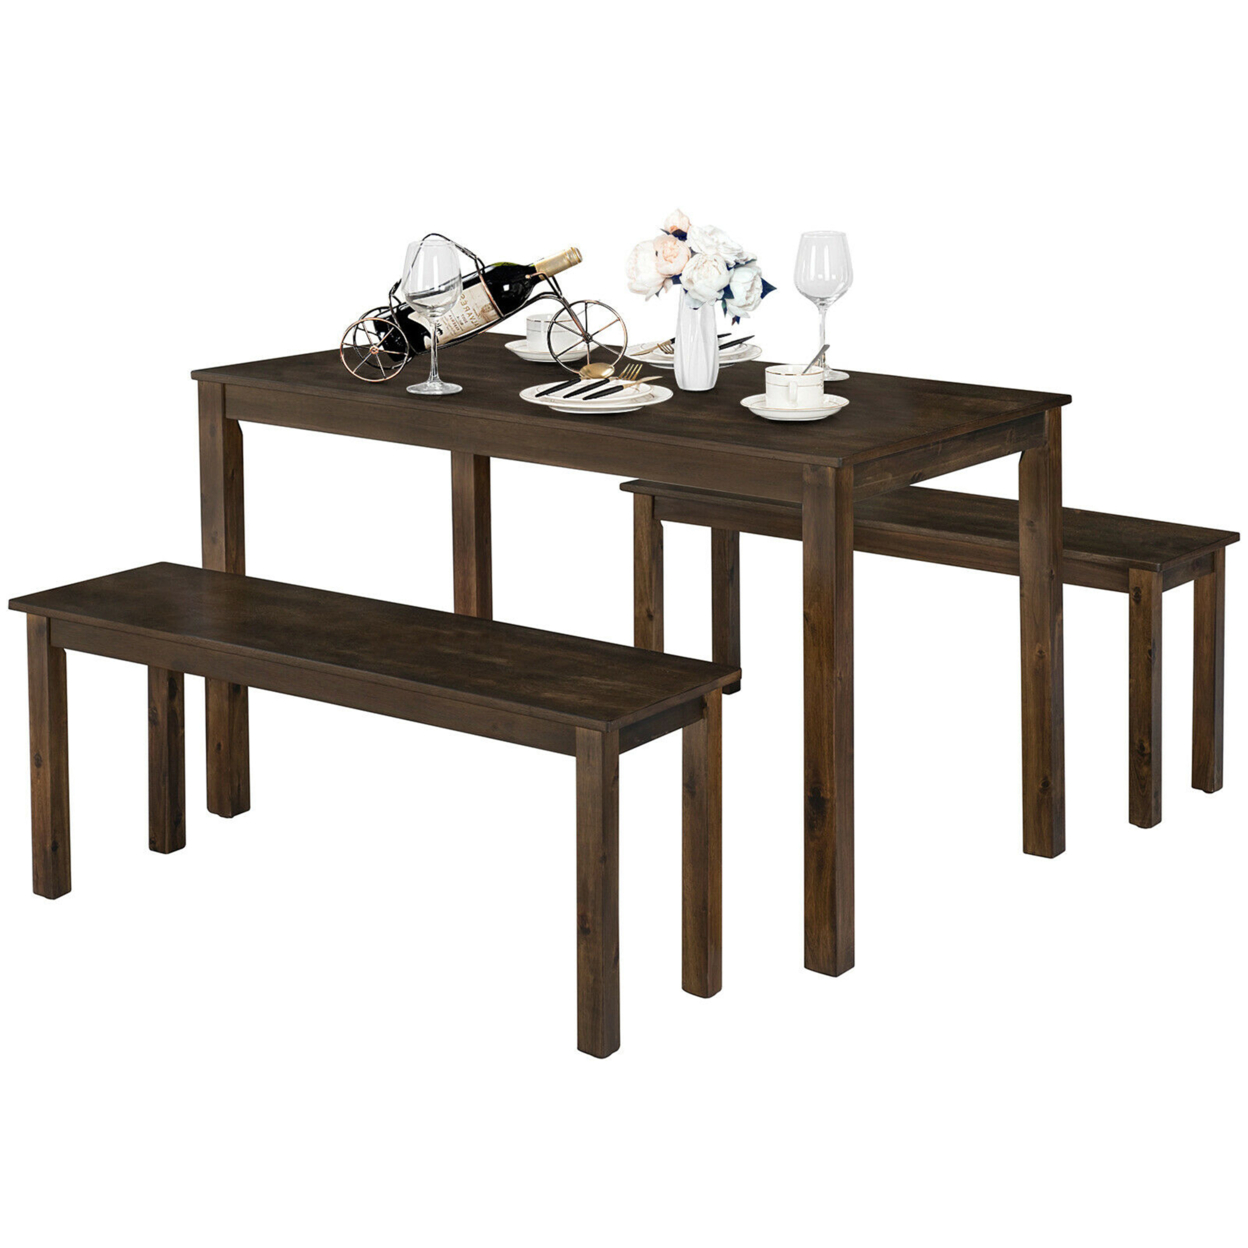 3pcs Dining Set Modern Studio Collection Table With 2 Benches Wood Legs Coffee